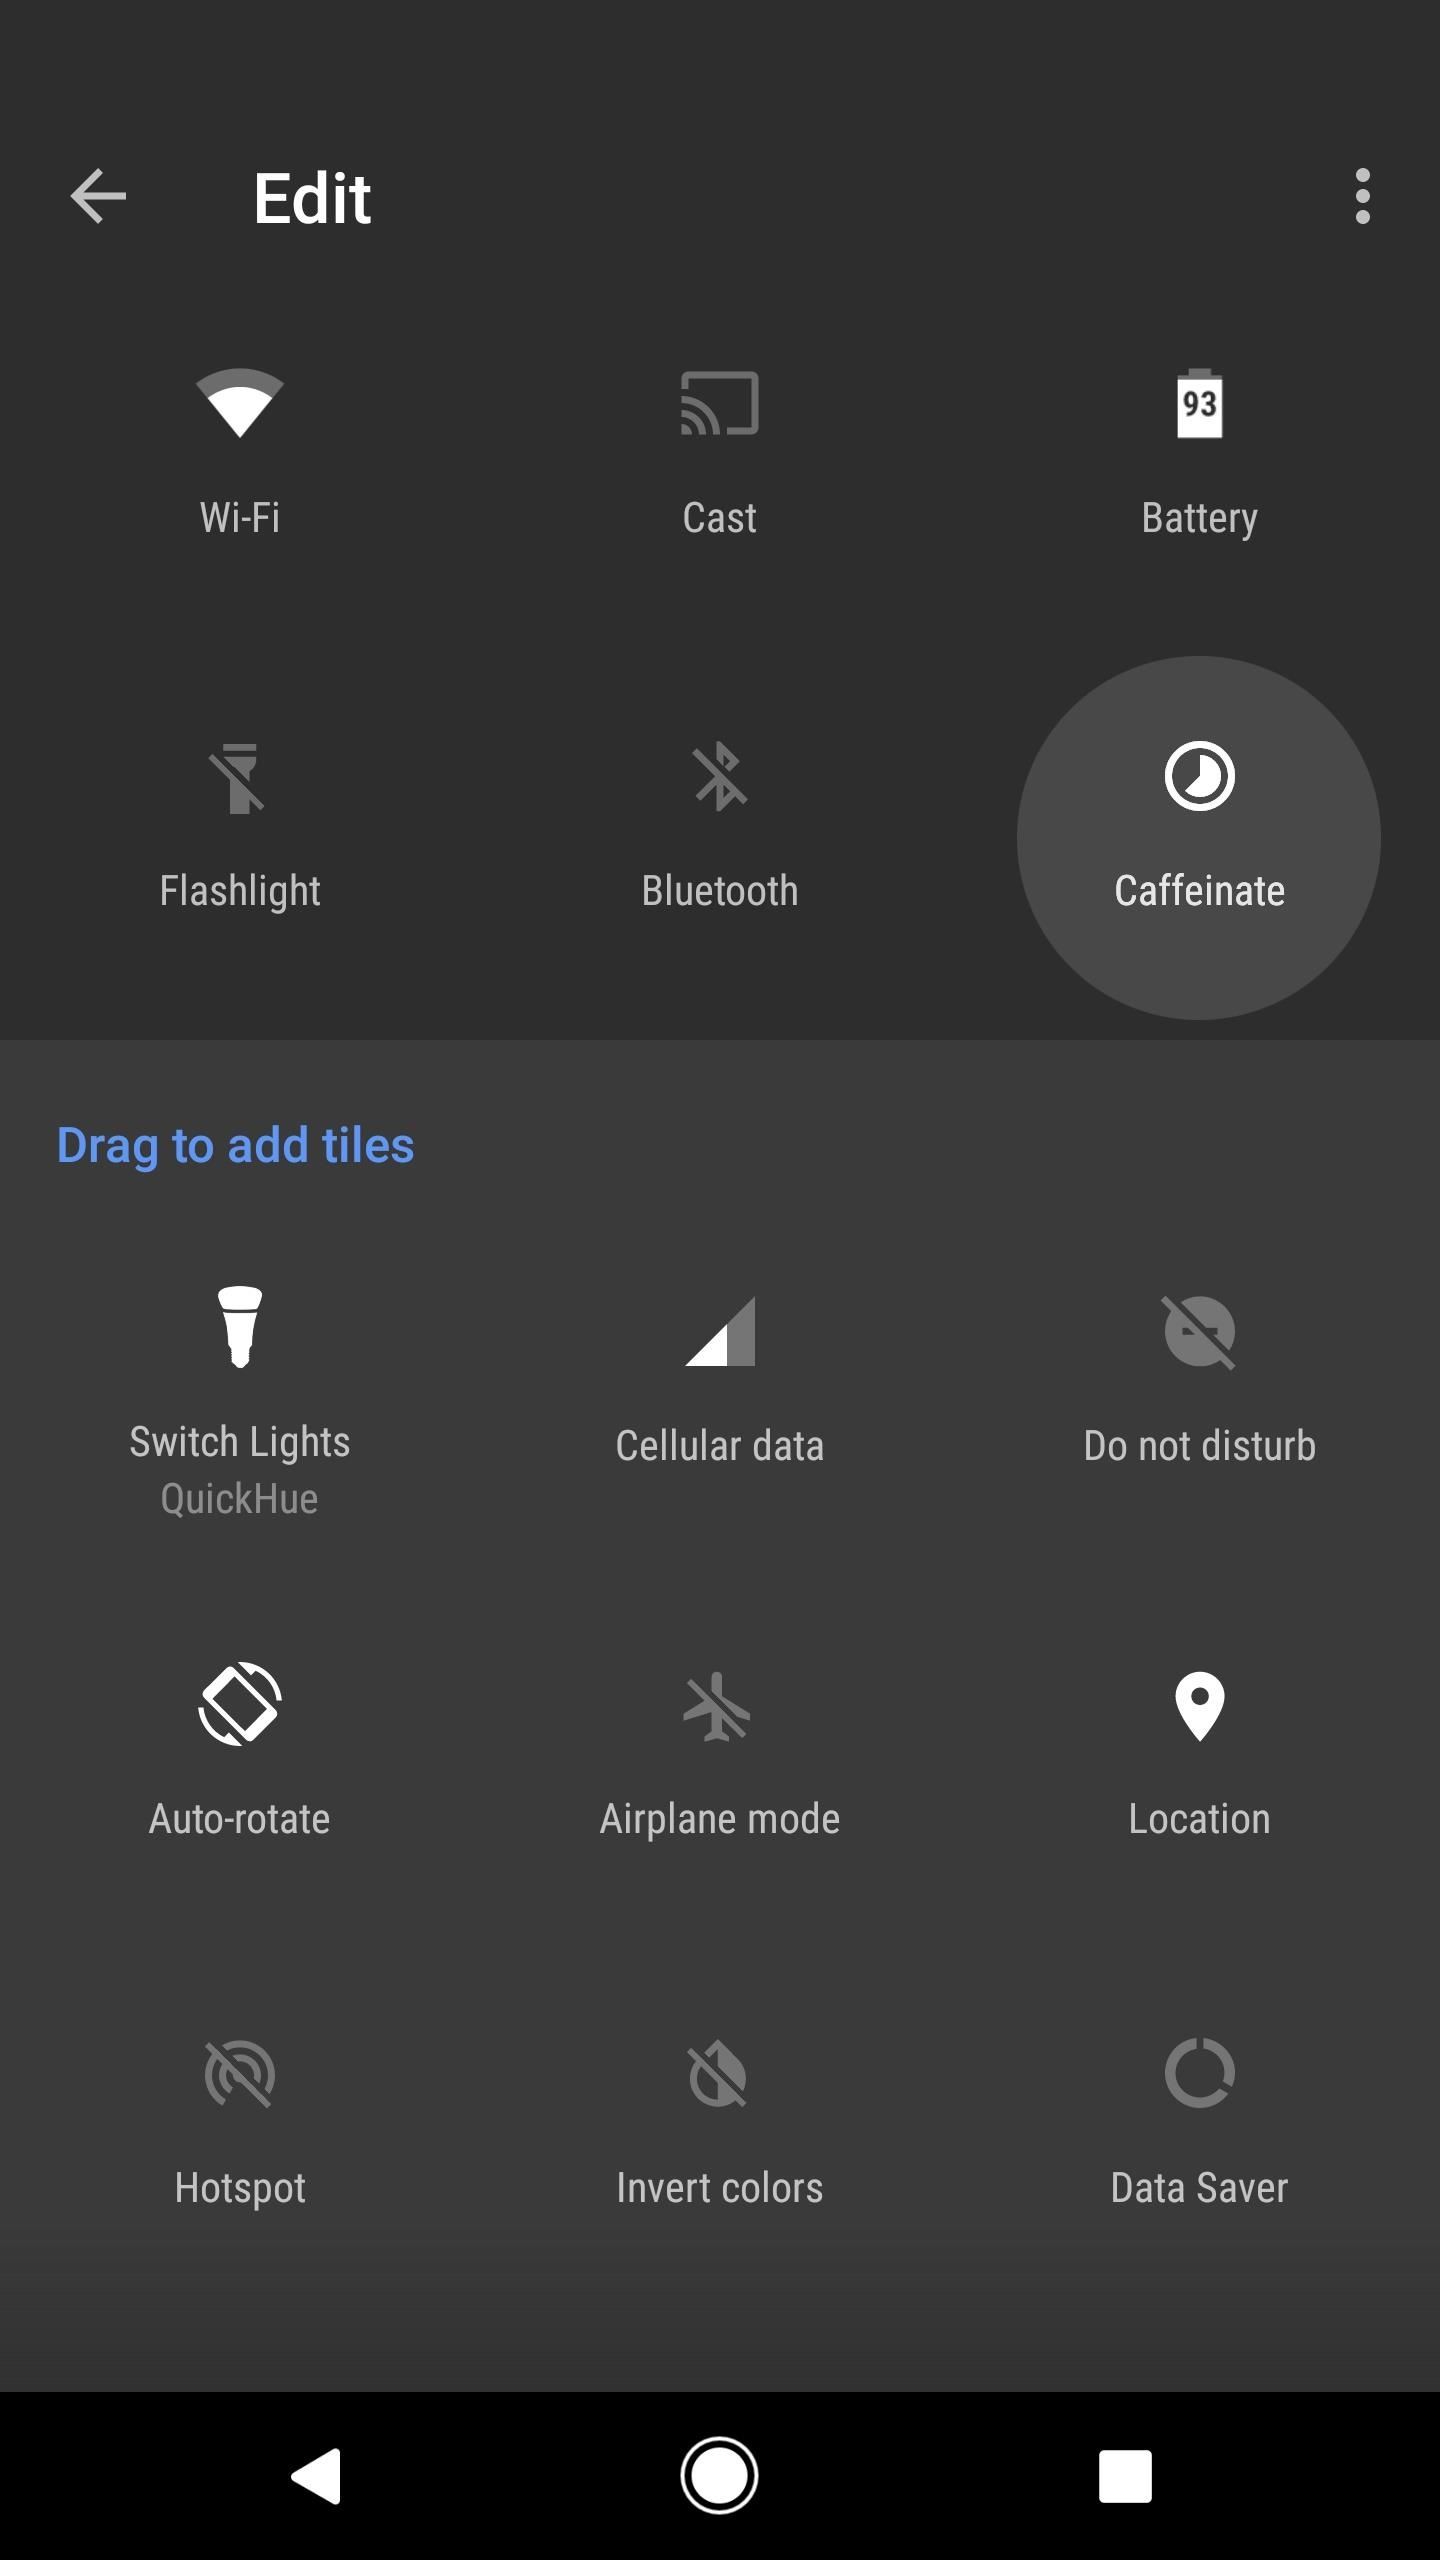 Get CyanogenMod's 'Caffeine' Feature to Keep Your Screen Awake Longer at the Press of a Button